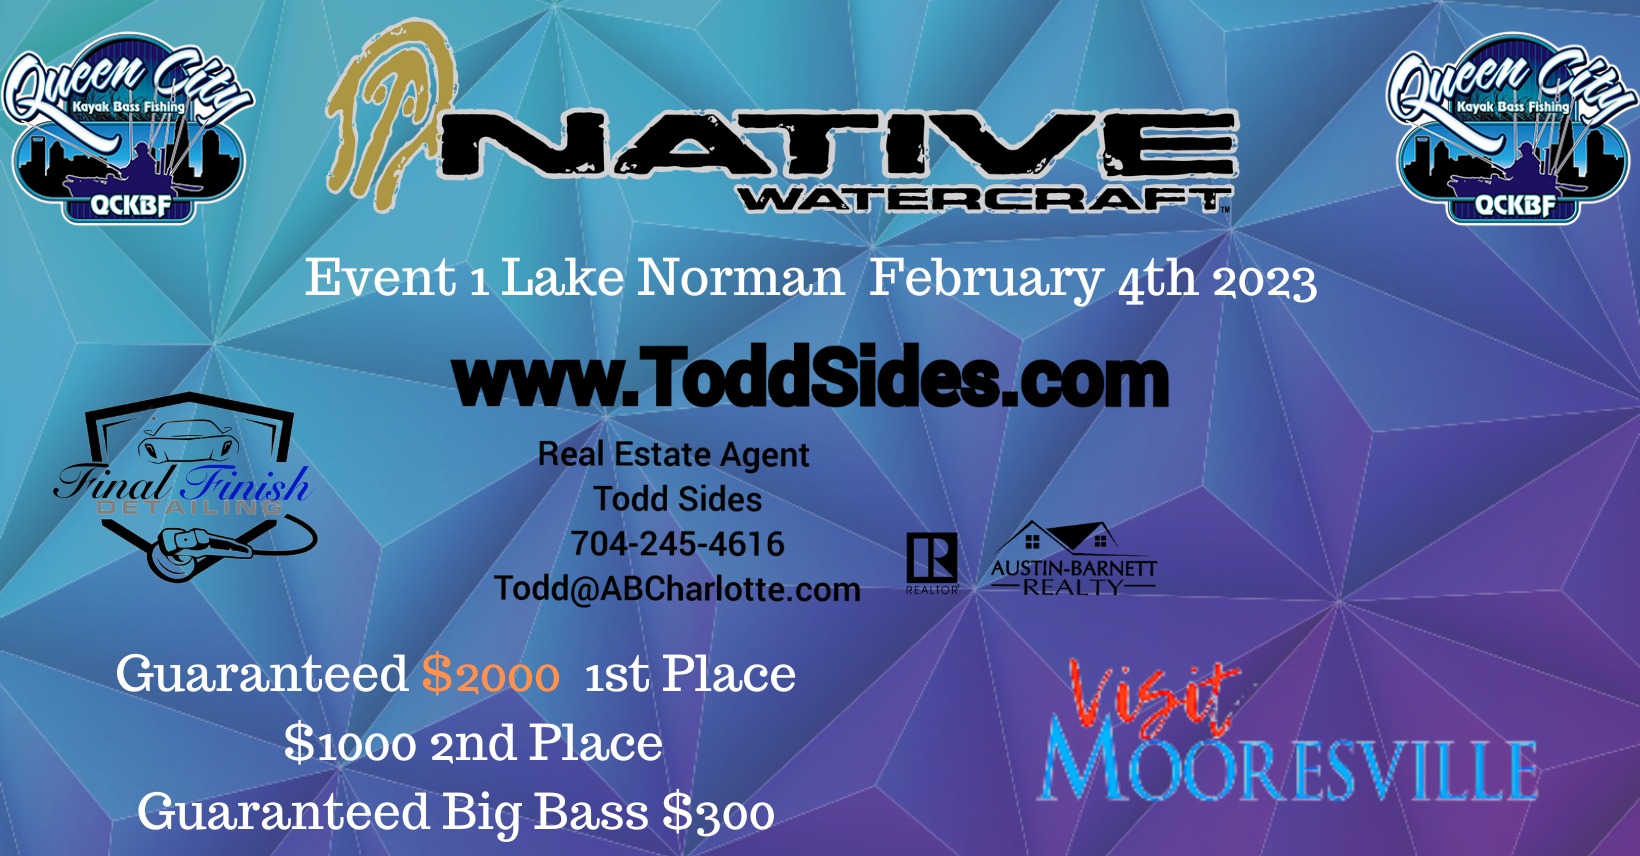 2023 Event 1 Lake Norman Presented by Todd Sides Reality